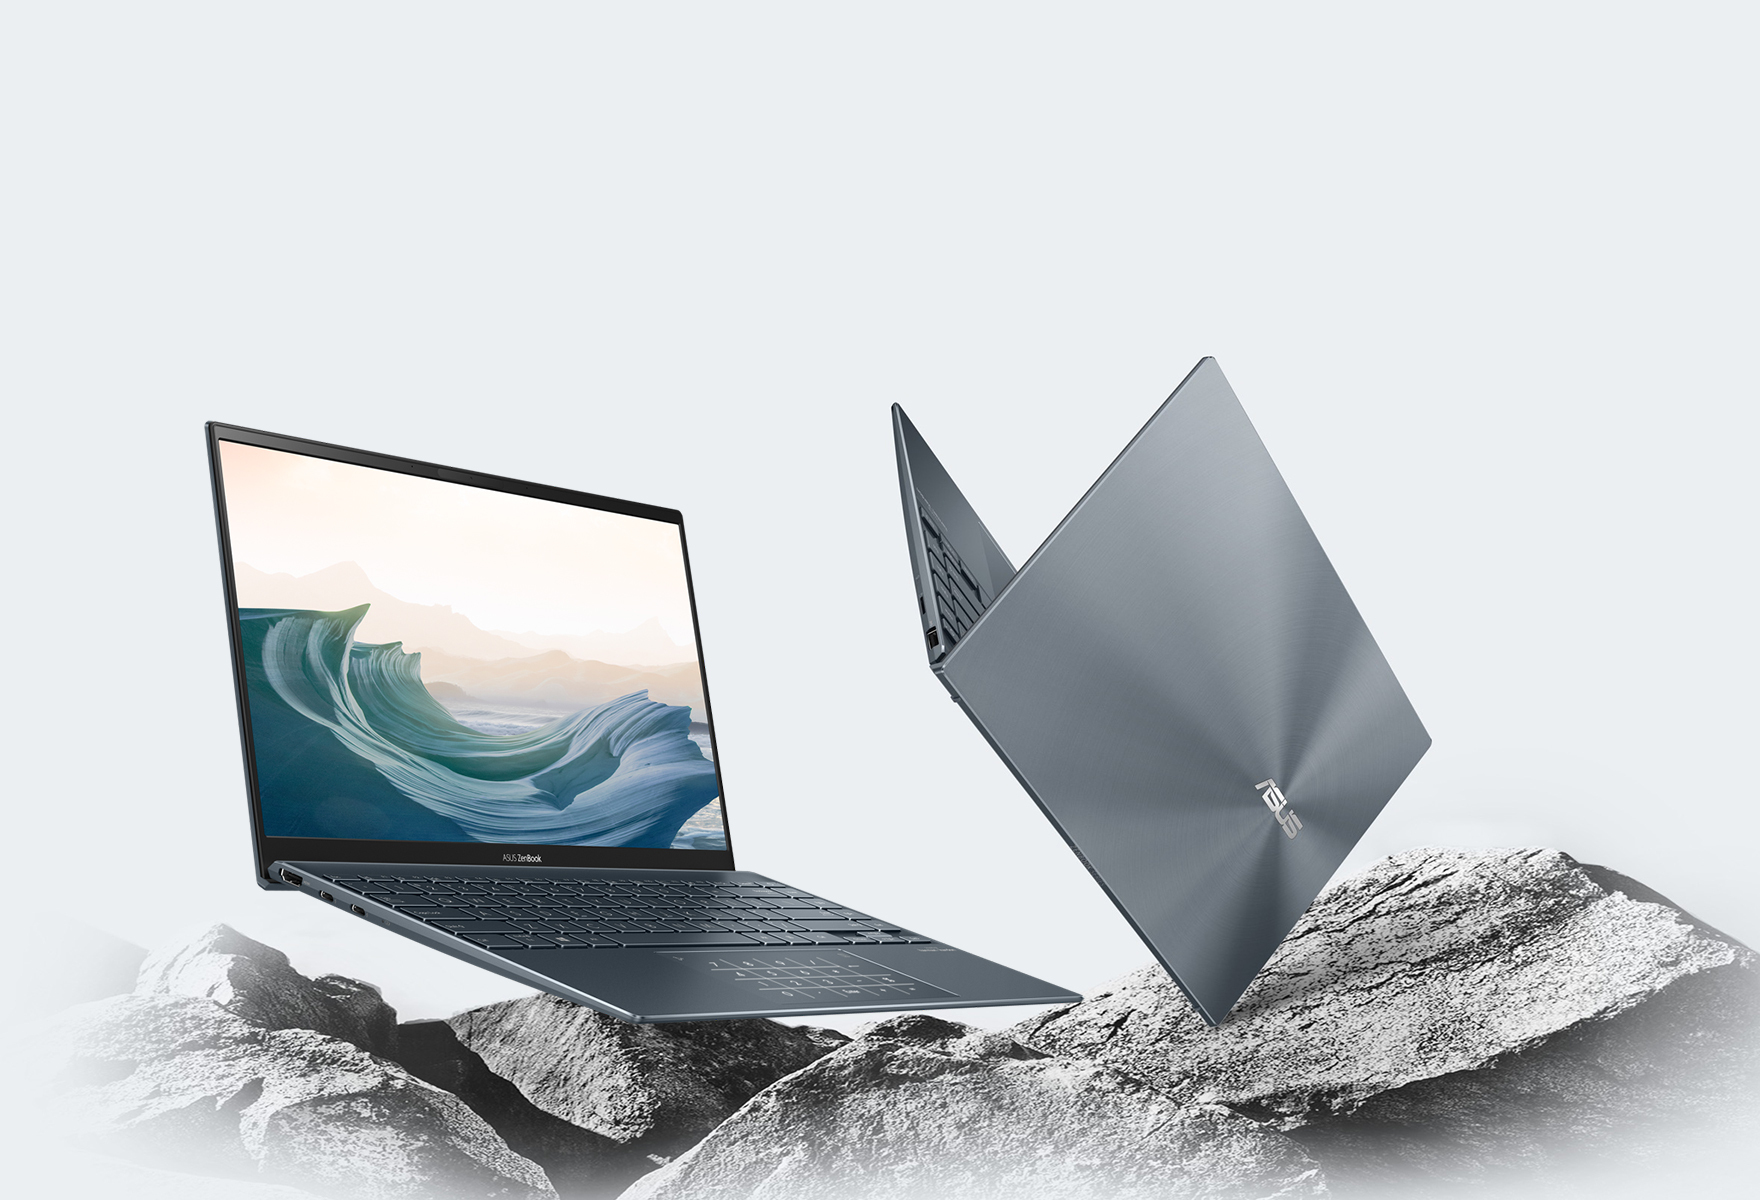 ASUS Launches All-New ZenBook 13 (UX325) and ZenBook 14 (UX425)